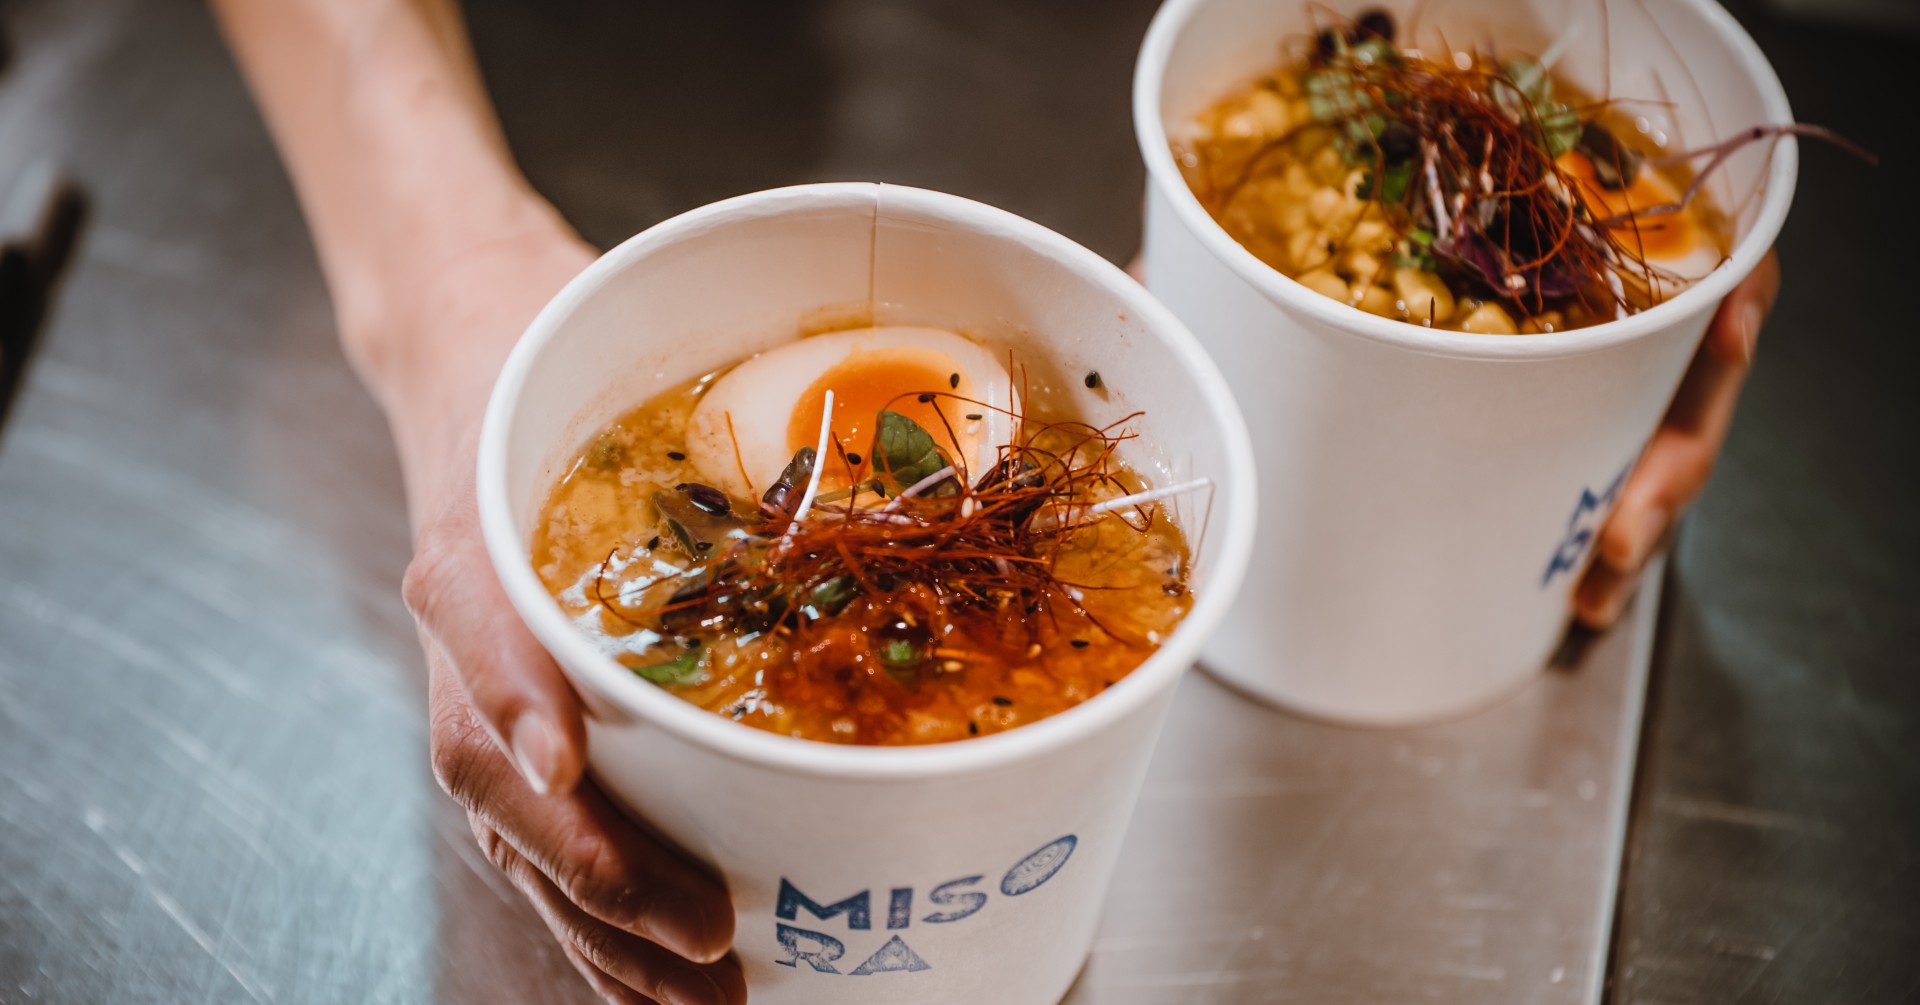 Miso Ra Food Truck Collective